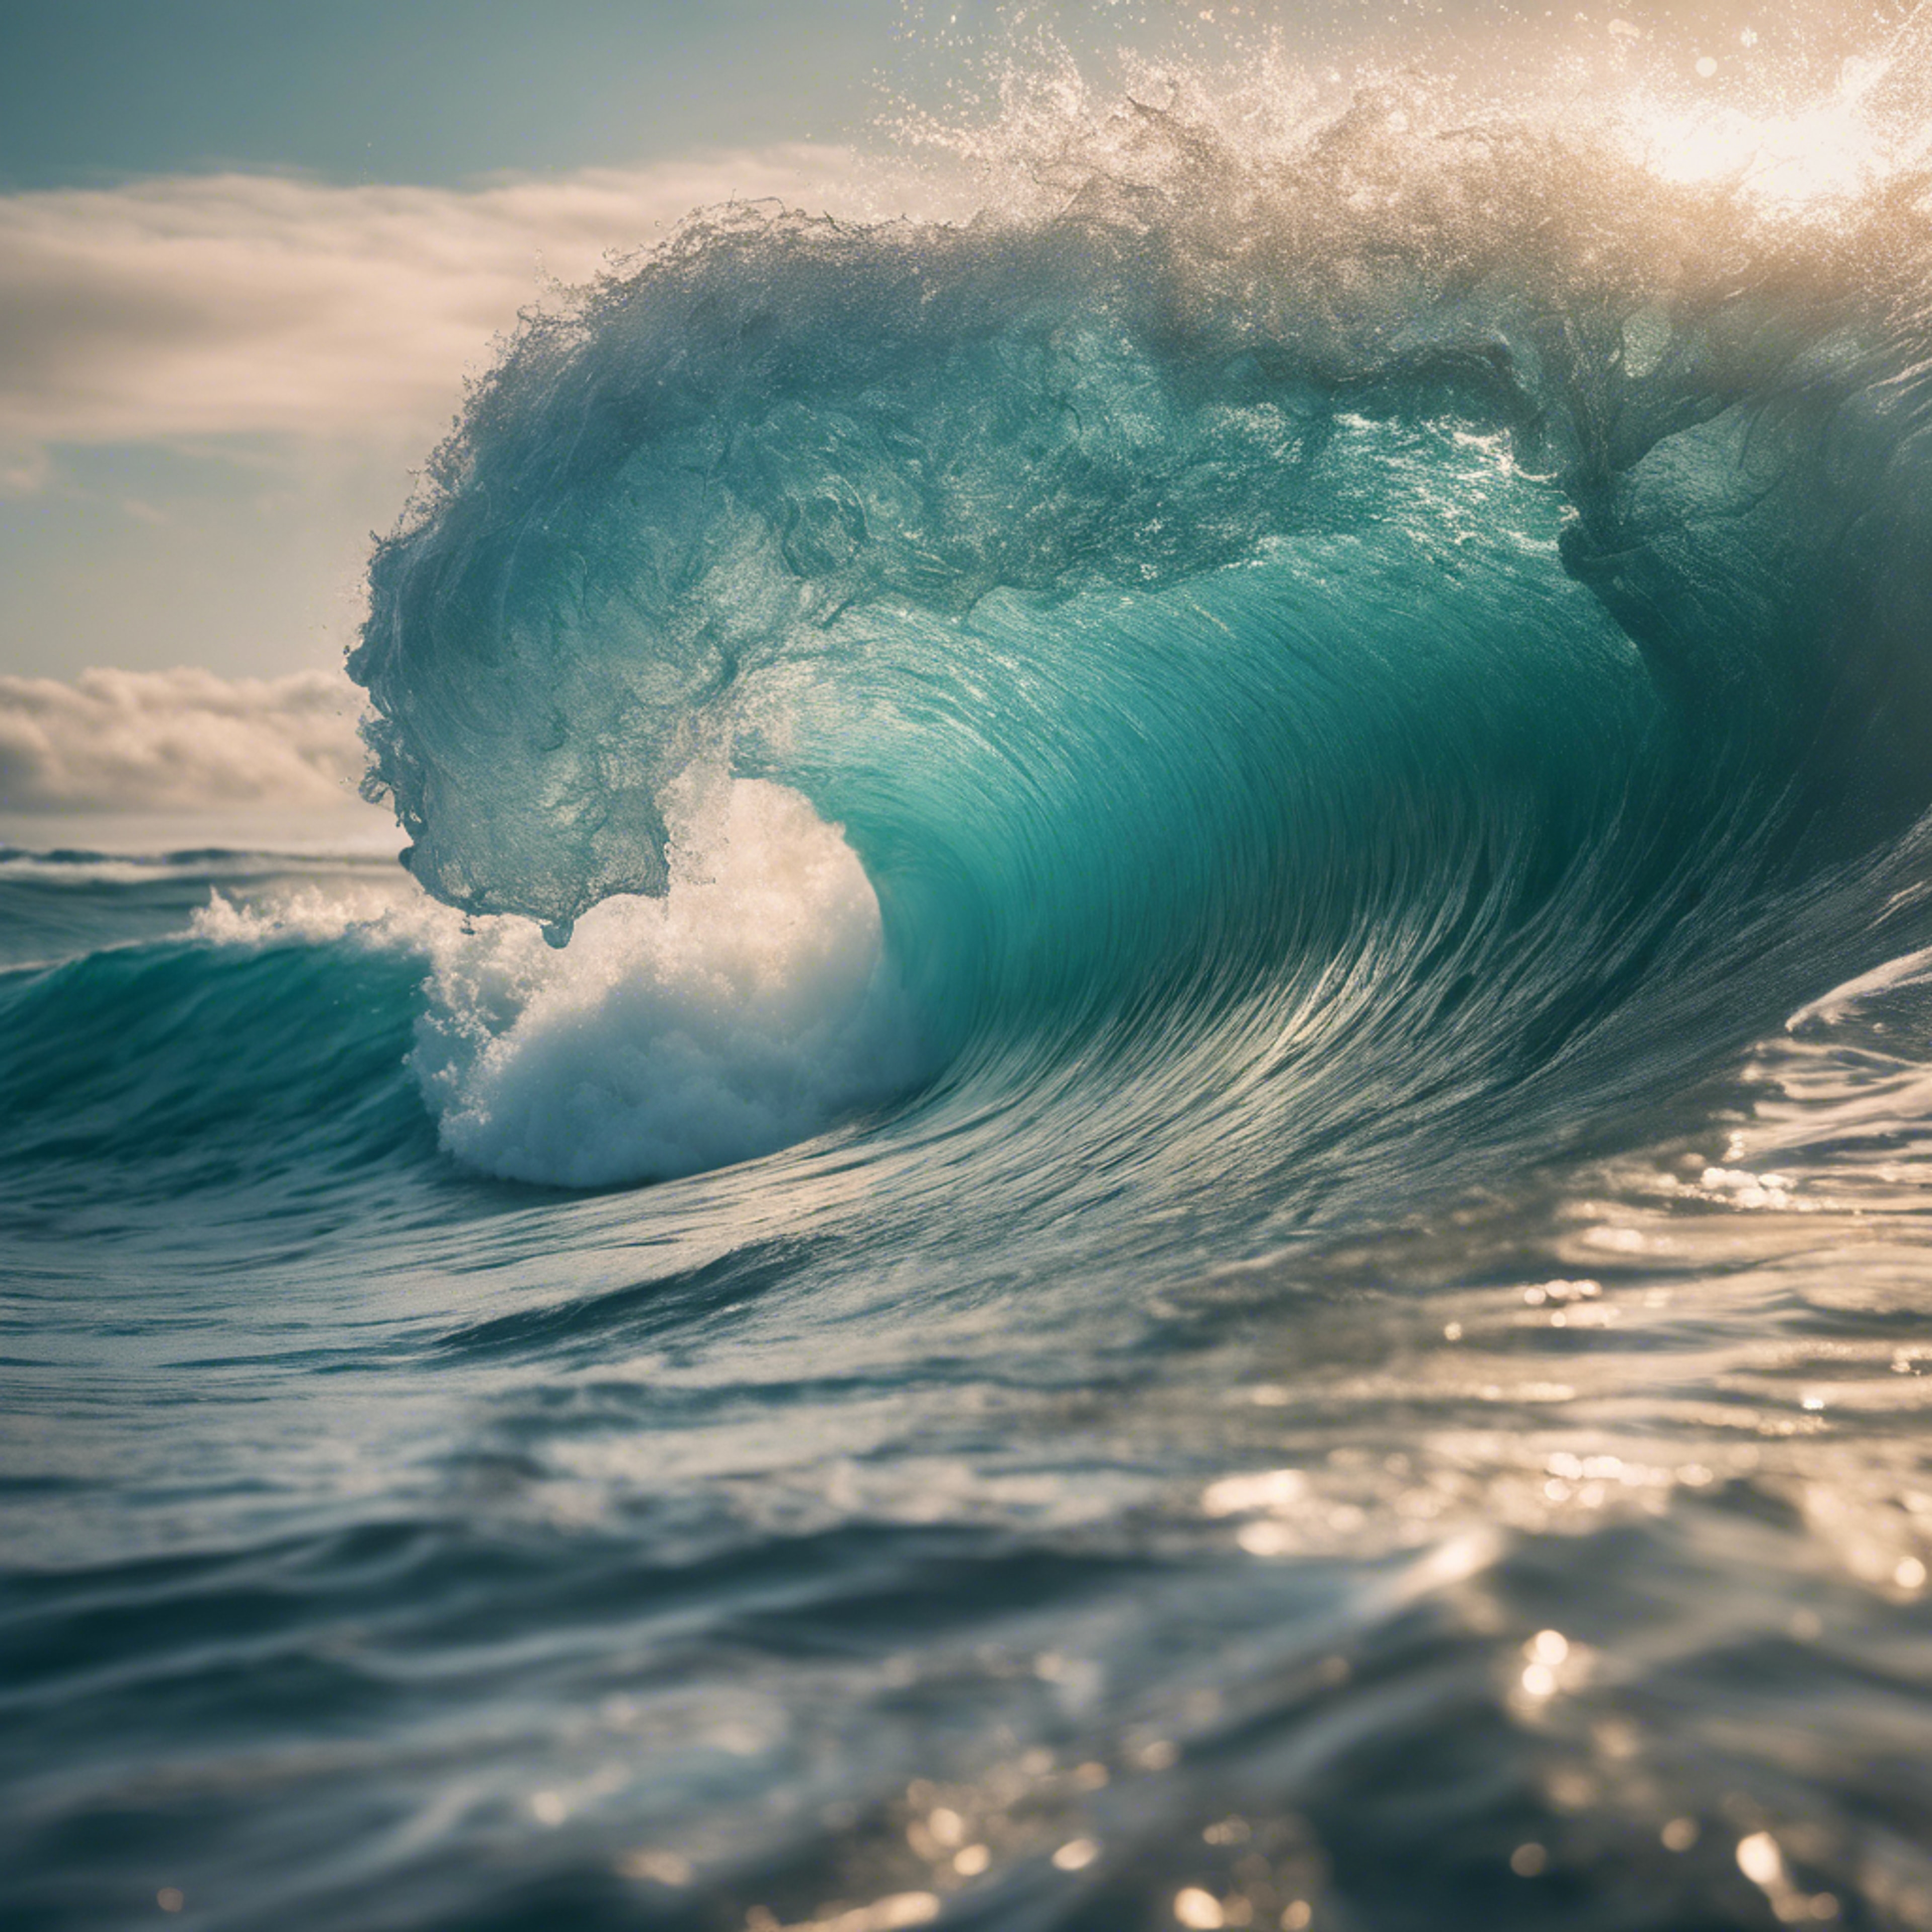 A powerful ocean wave about to crash, casting a cool teal hue. Wallpaper[600fa377246440af9acb]